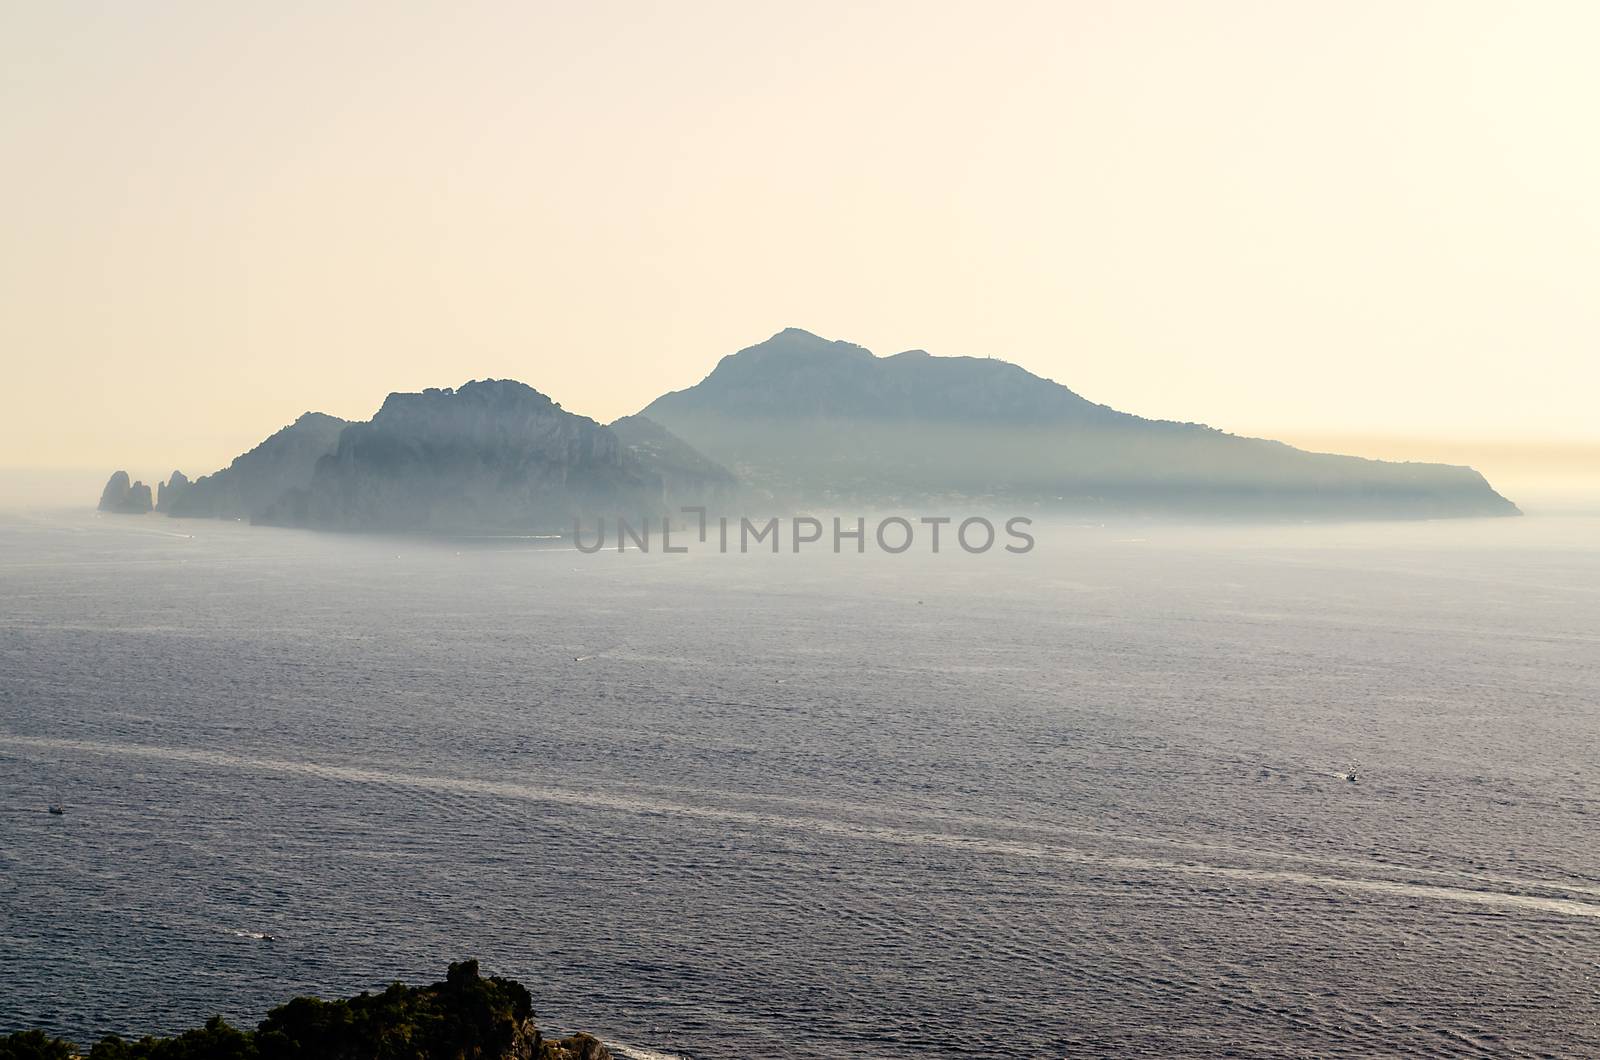 Island of Capri, as seen from the town of Massa Lubrense